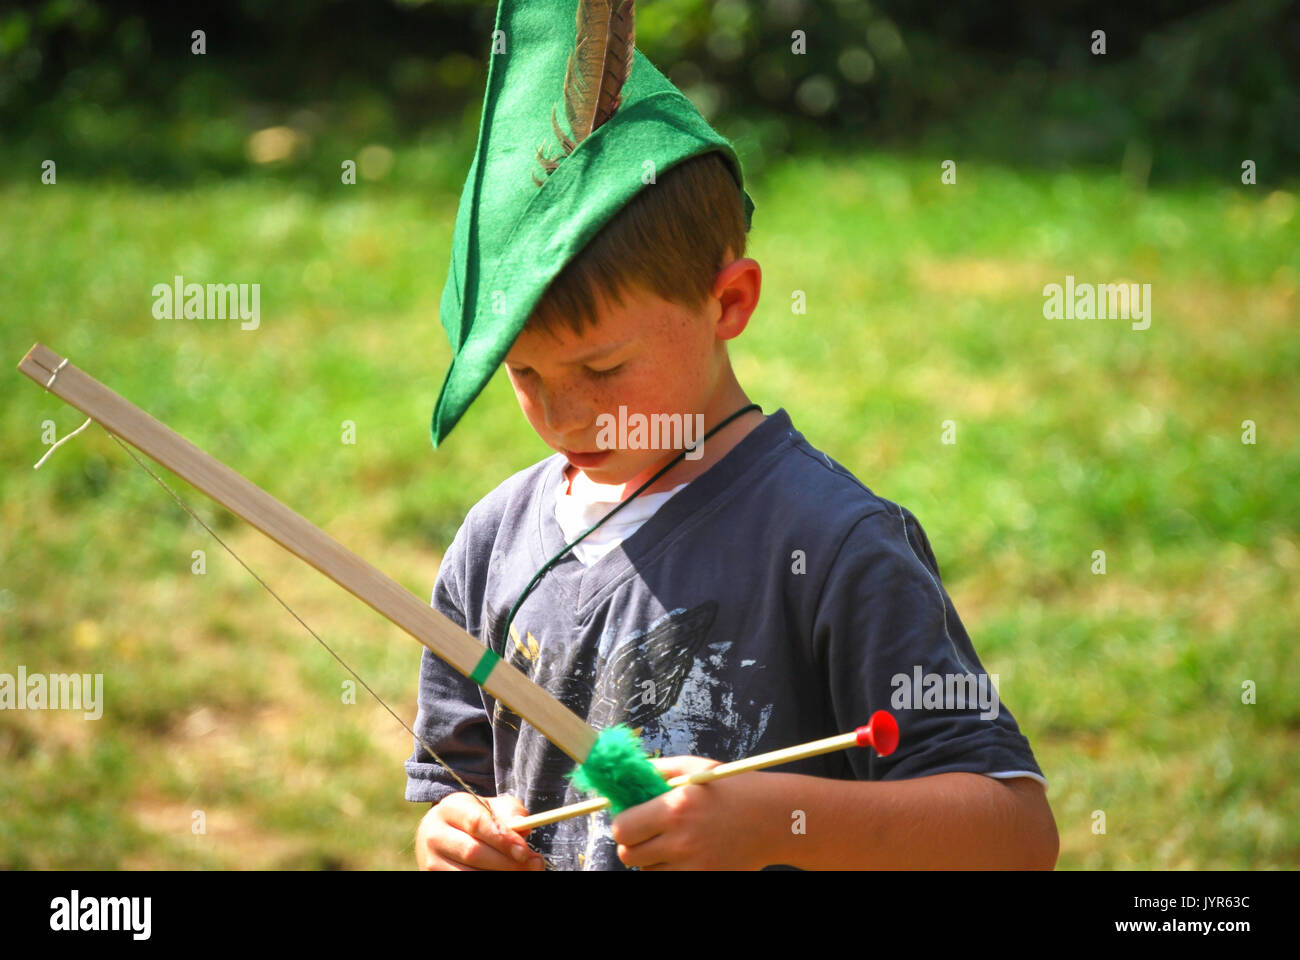 Boy with green hat, bow and arrow, Robin Hood Festival, Sherwood Forest, Nottinghamshire, England, United Kingdom Stock Photo